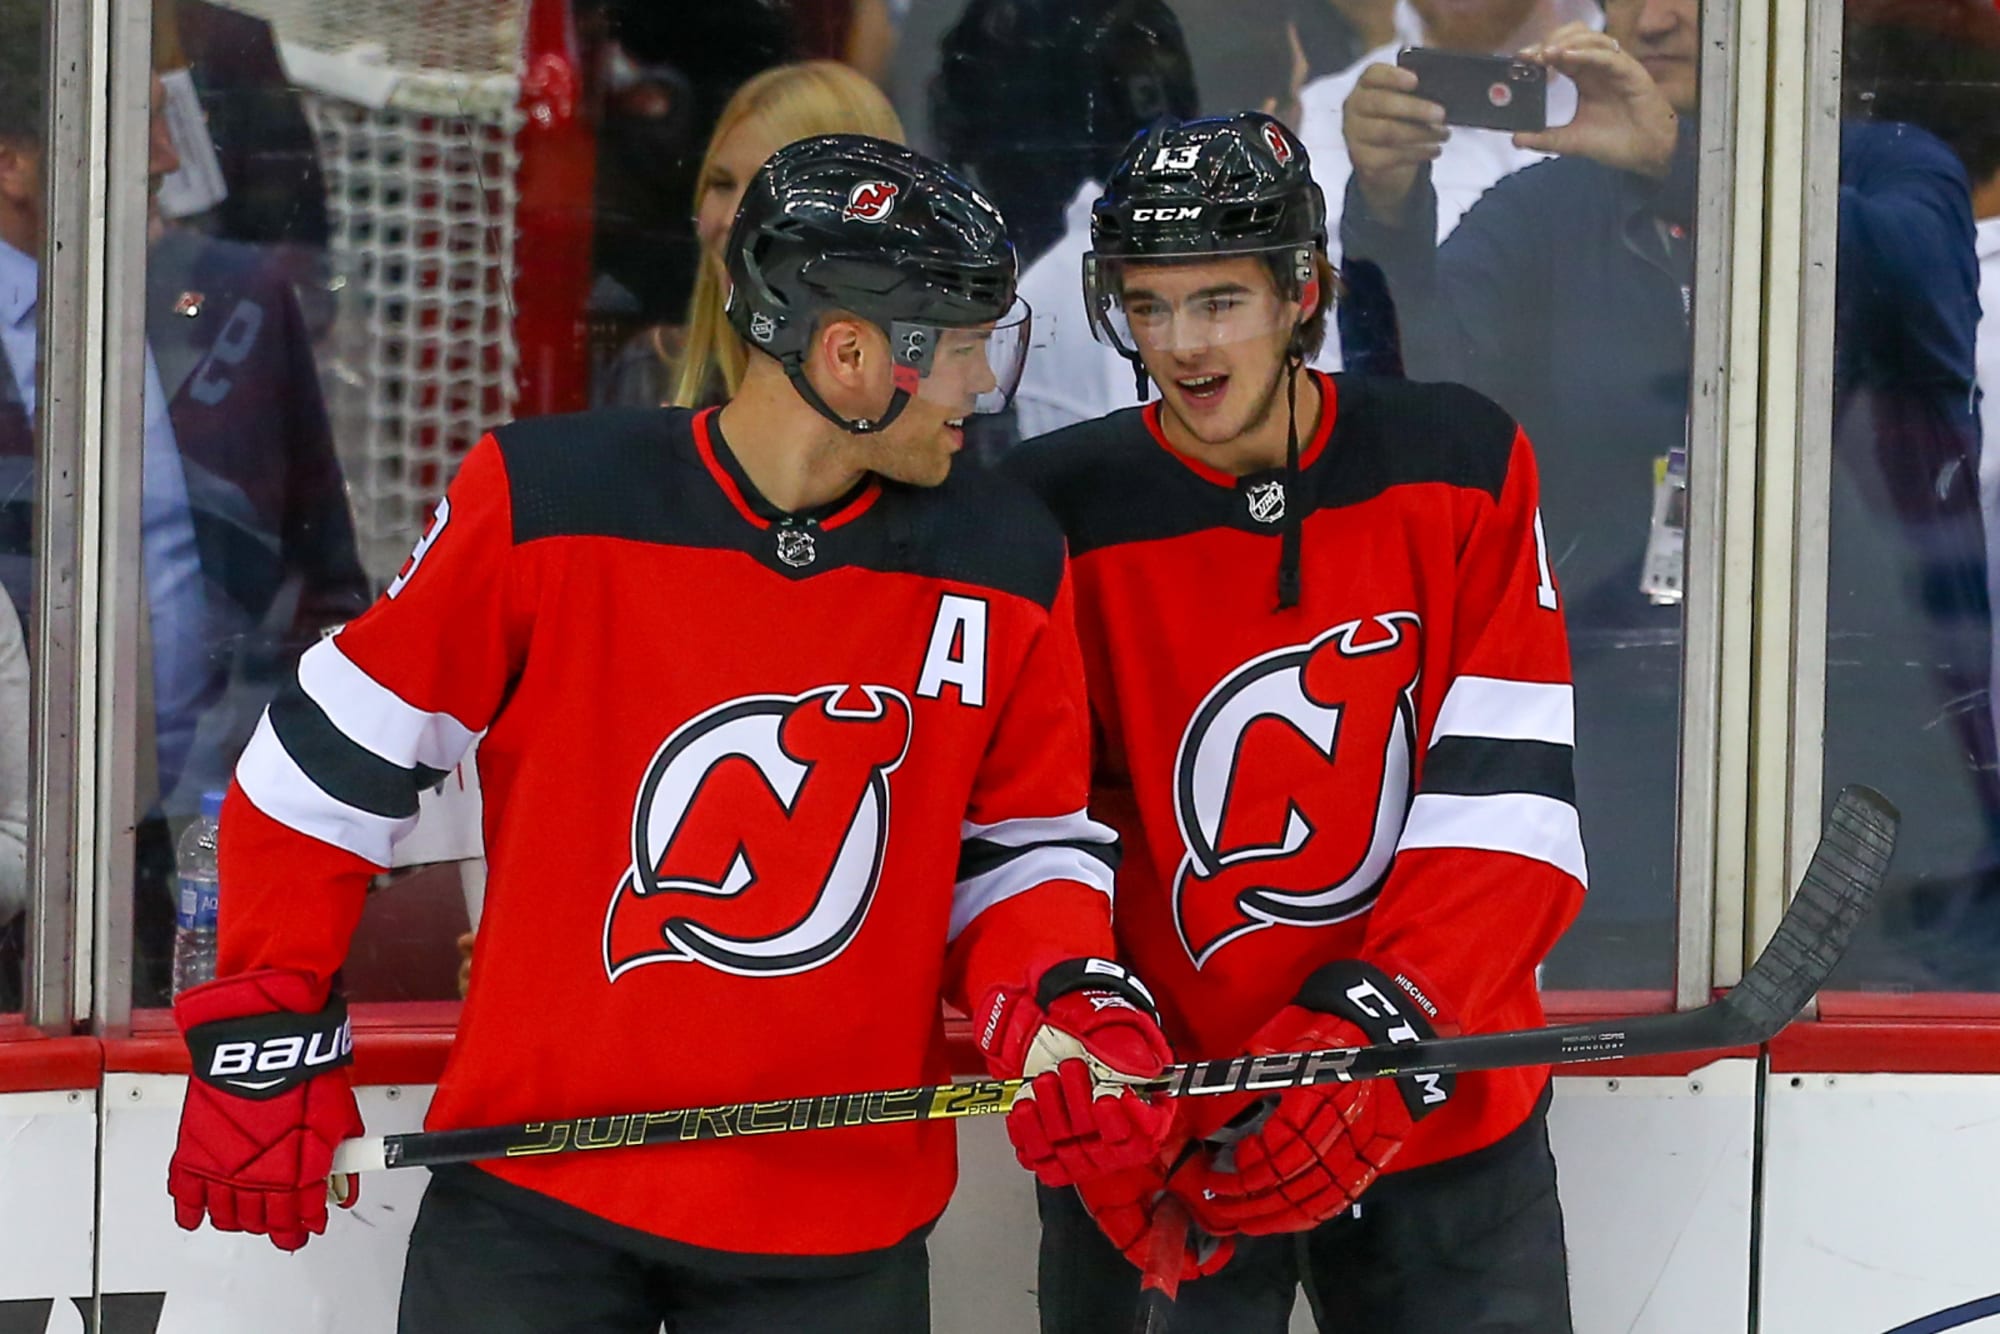 Taylor Hall scores twice as Devils win home opener